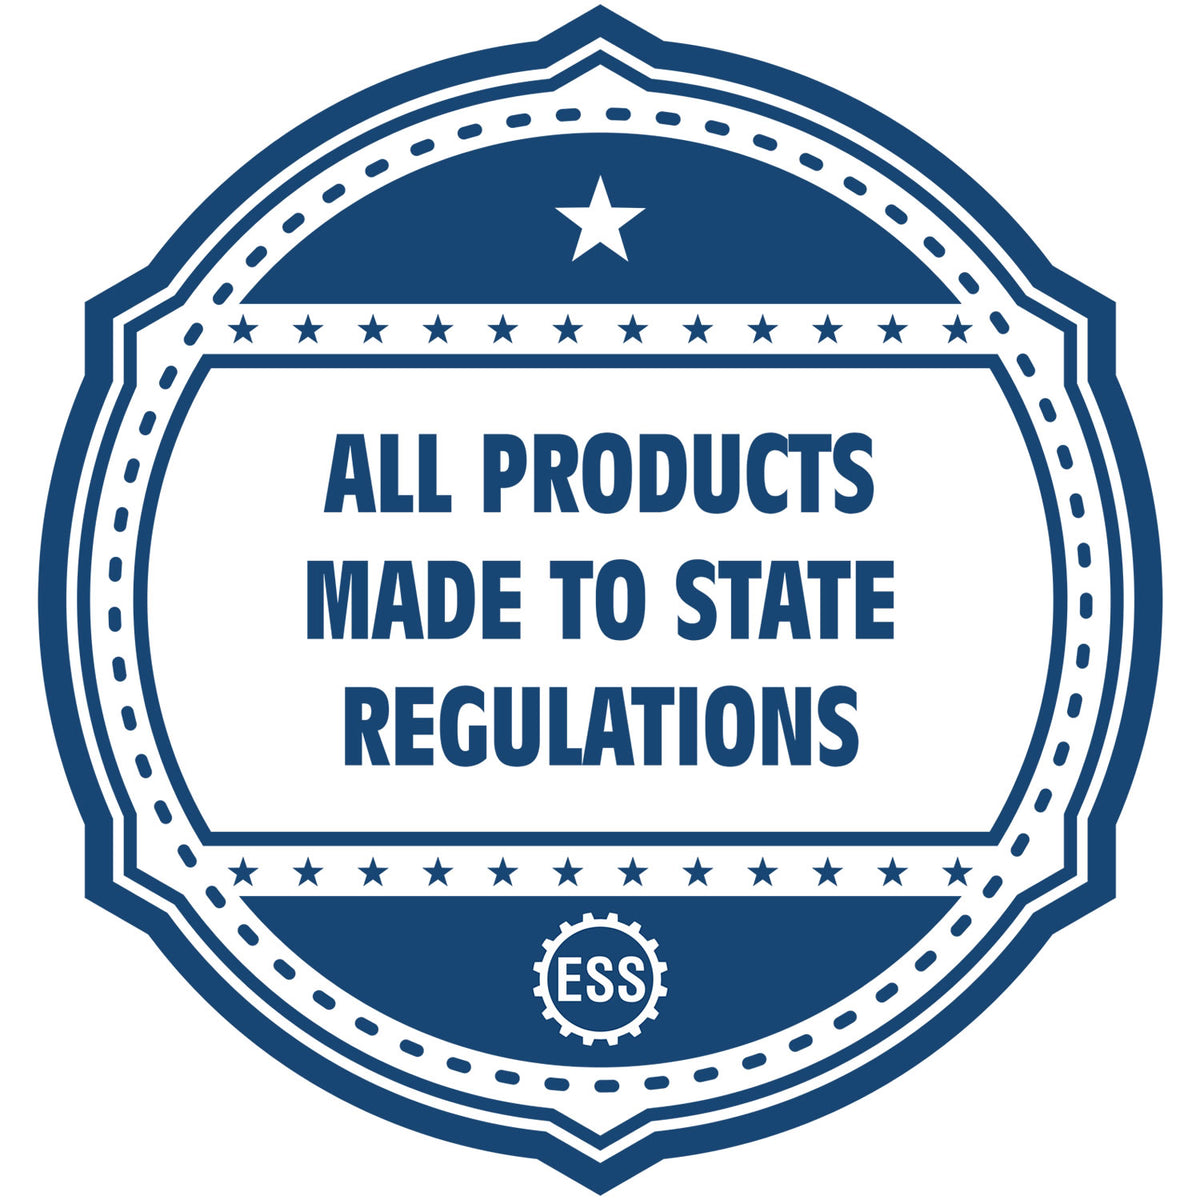 An icon or badge element for the Missouri Landscape Architectural Seal Stamp showing that this product is made in compliance with state regulations.